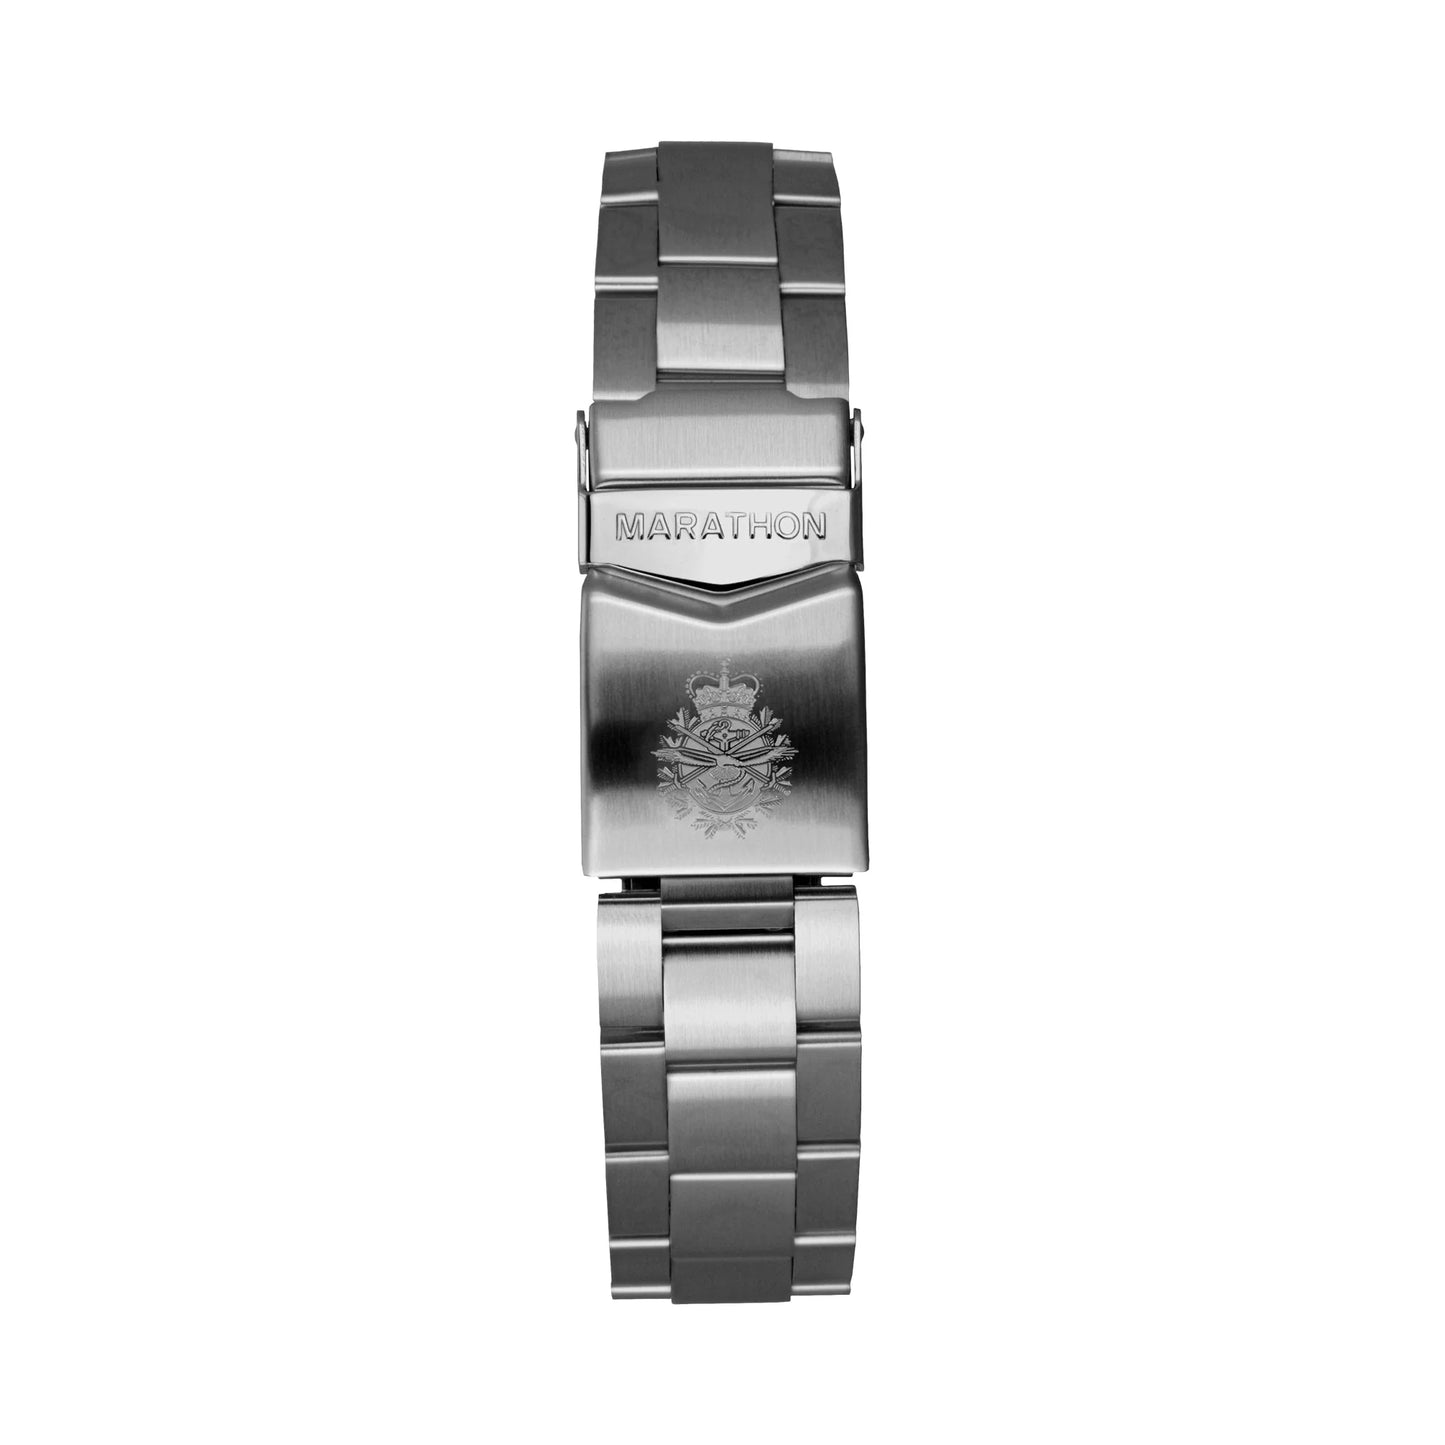 LARGE DIVER'S AUTOMATIC (GSAR) WITH STAINLESS STEEL BRACELET - 41MM